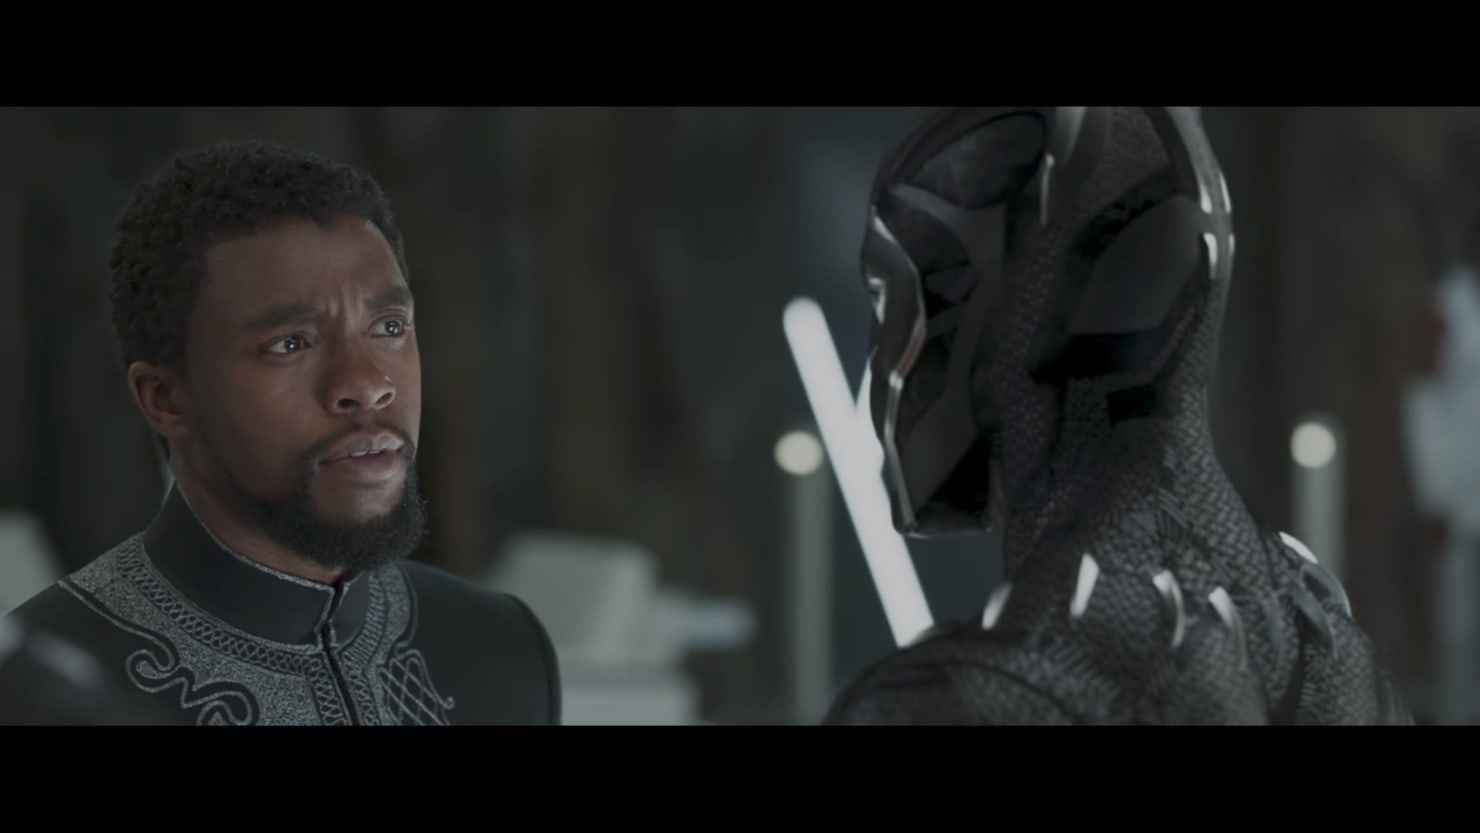 The New Marvel ‘Black Panther’ Trailer Is Out and It Is Epic.